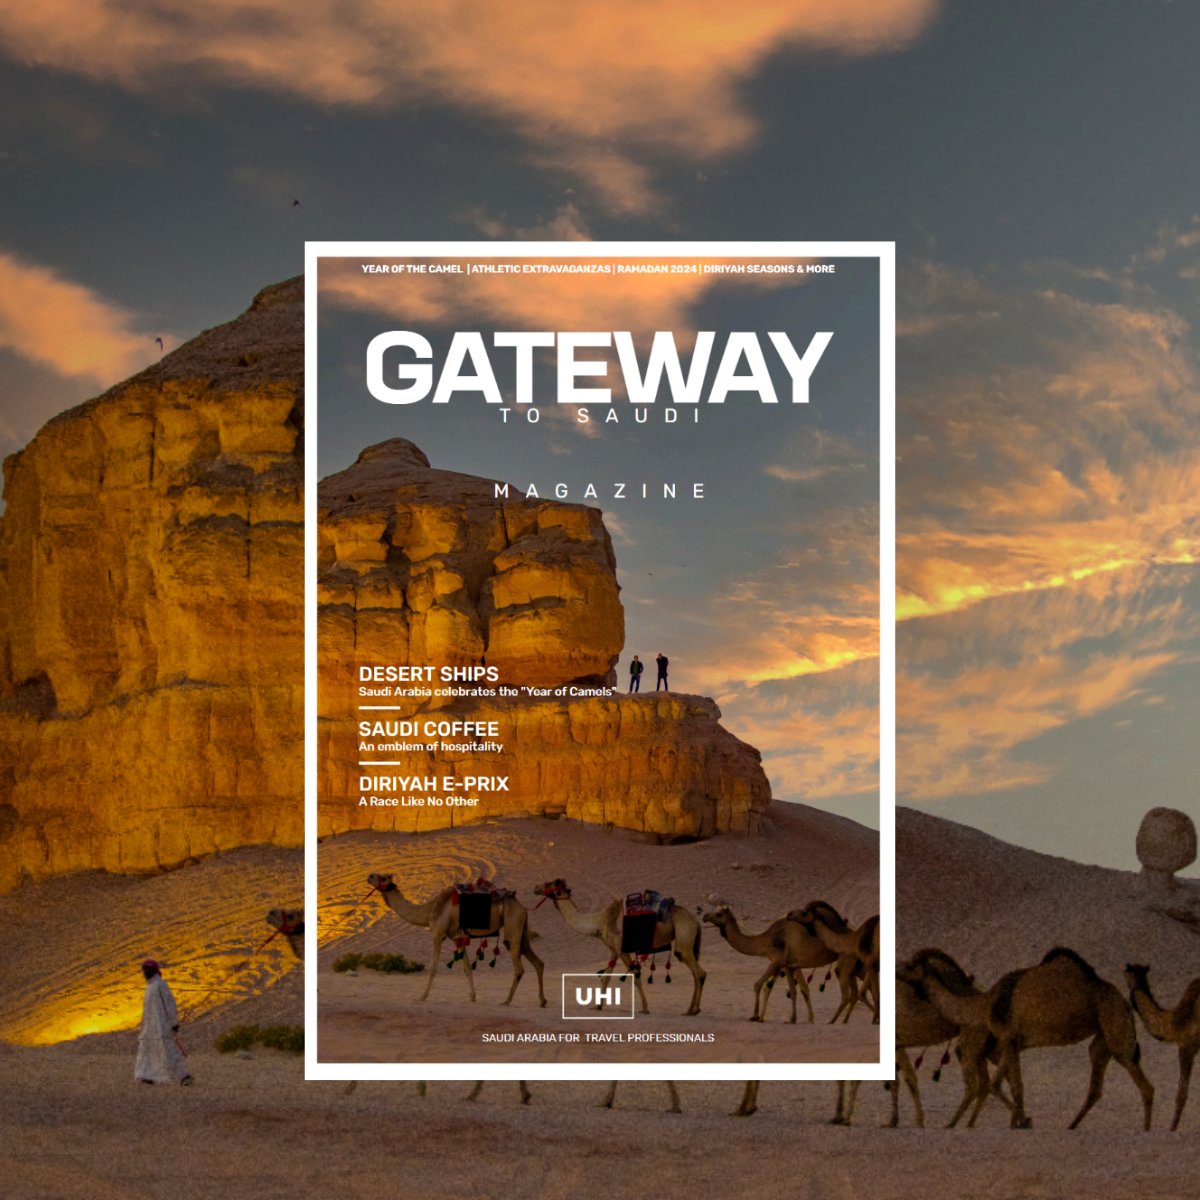 📣 Introducing the January edition of Gateway to Saudi magazine!

Dive into the rich and vibrant culture of Saudi Arabia with our latest issue 📖

Link: shorturl.at/coqvP

#UHI #GatewayToSaudi #b2btravel #gatewaytosaudimagazine #WebBeds #visitsaudi